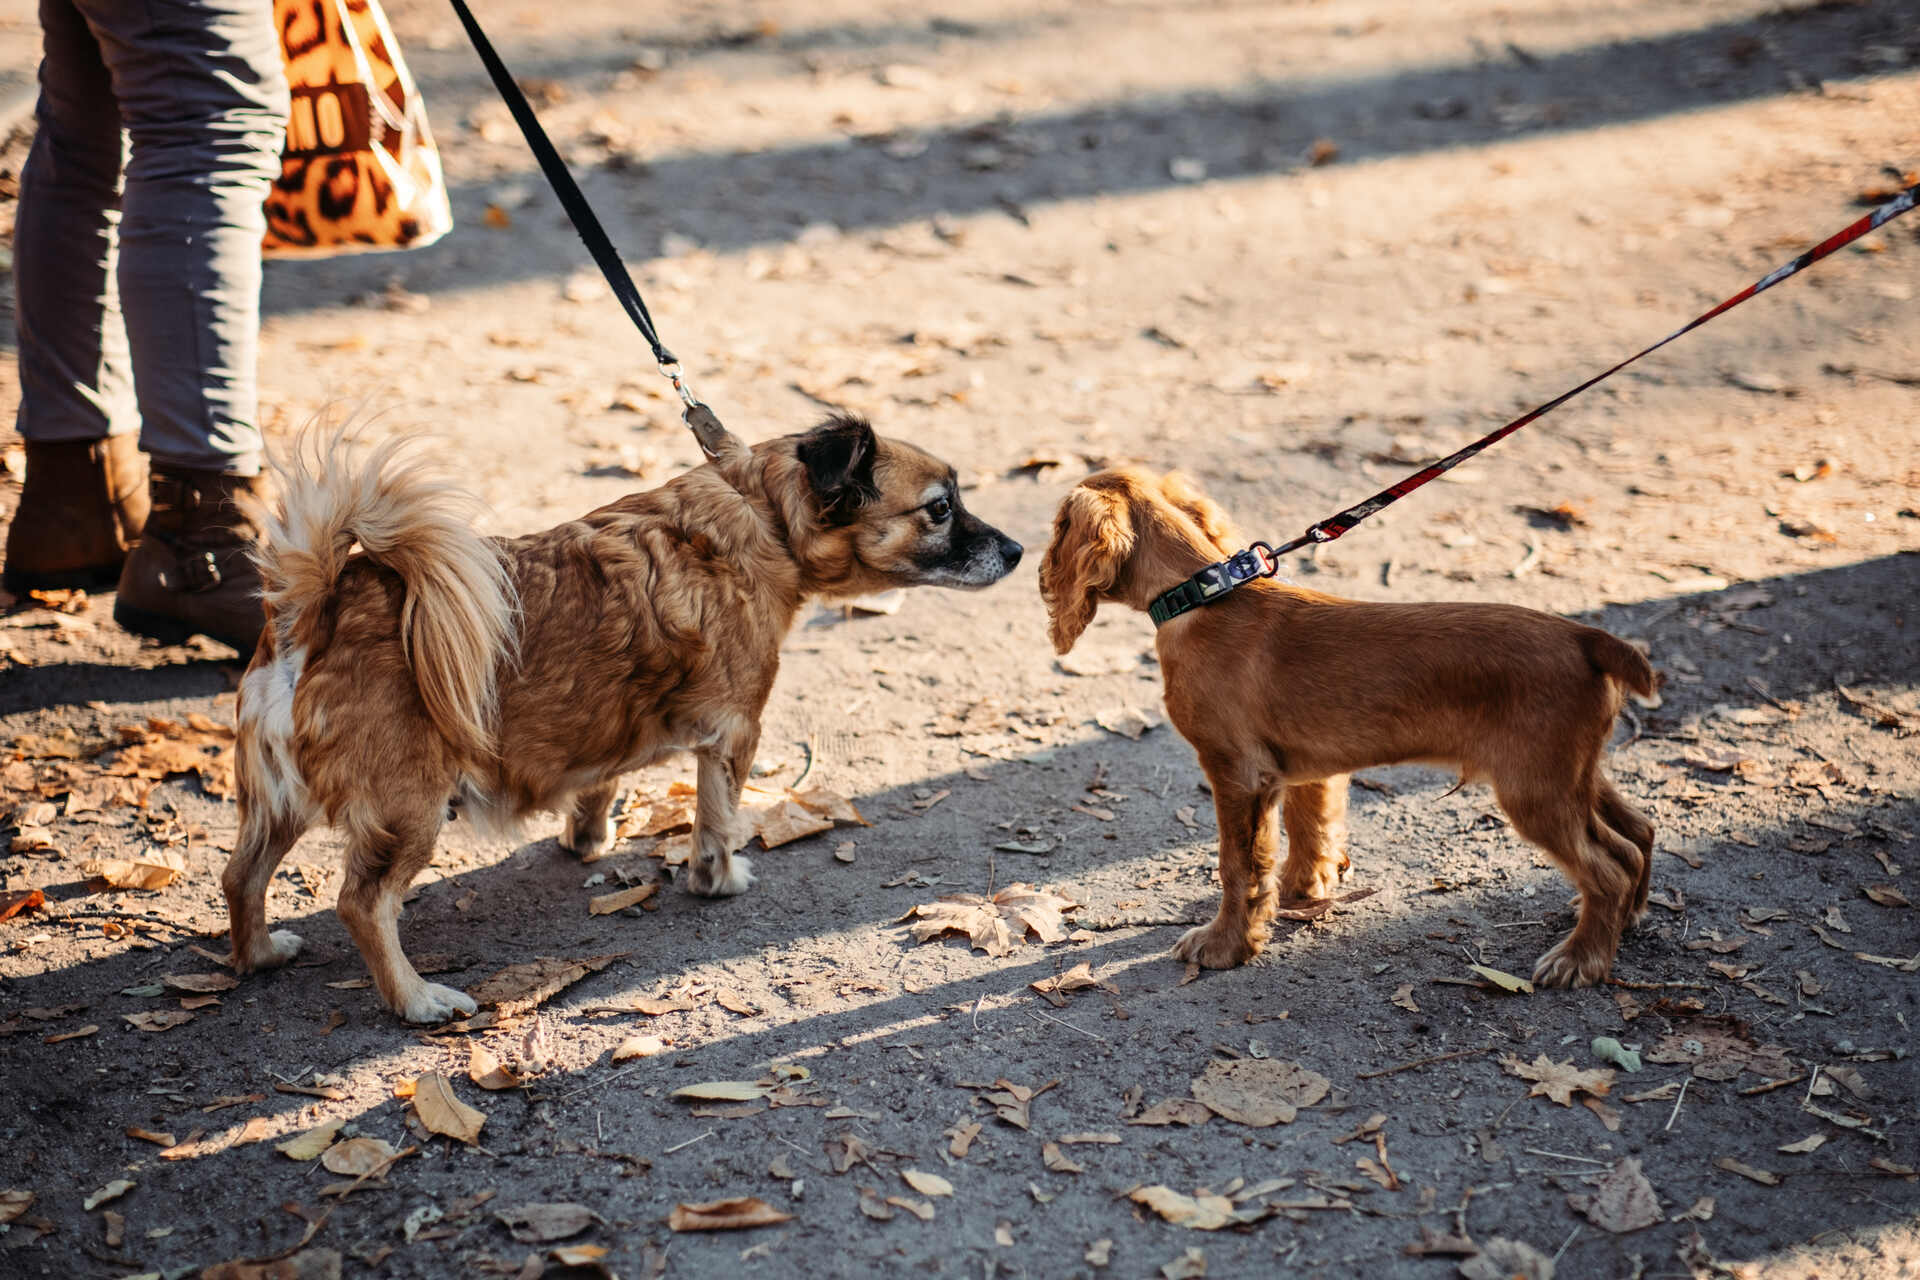 Two leashed dogs getting introduced to each other